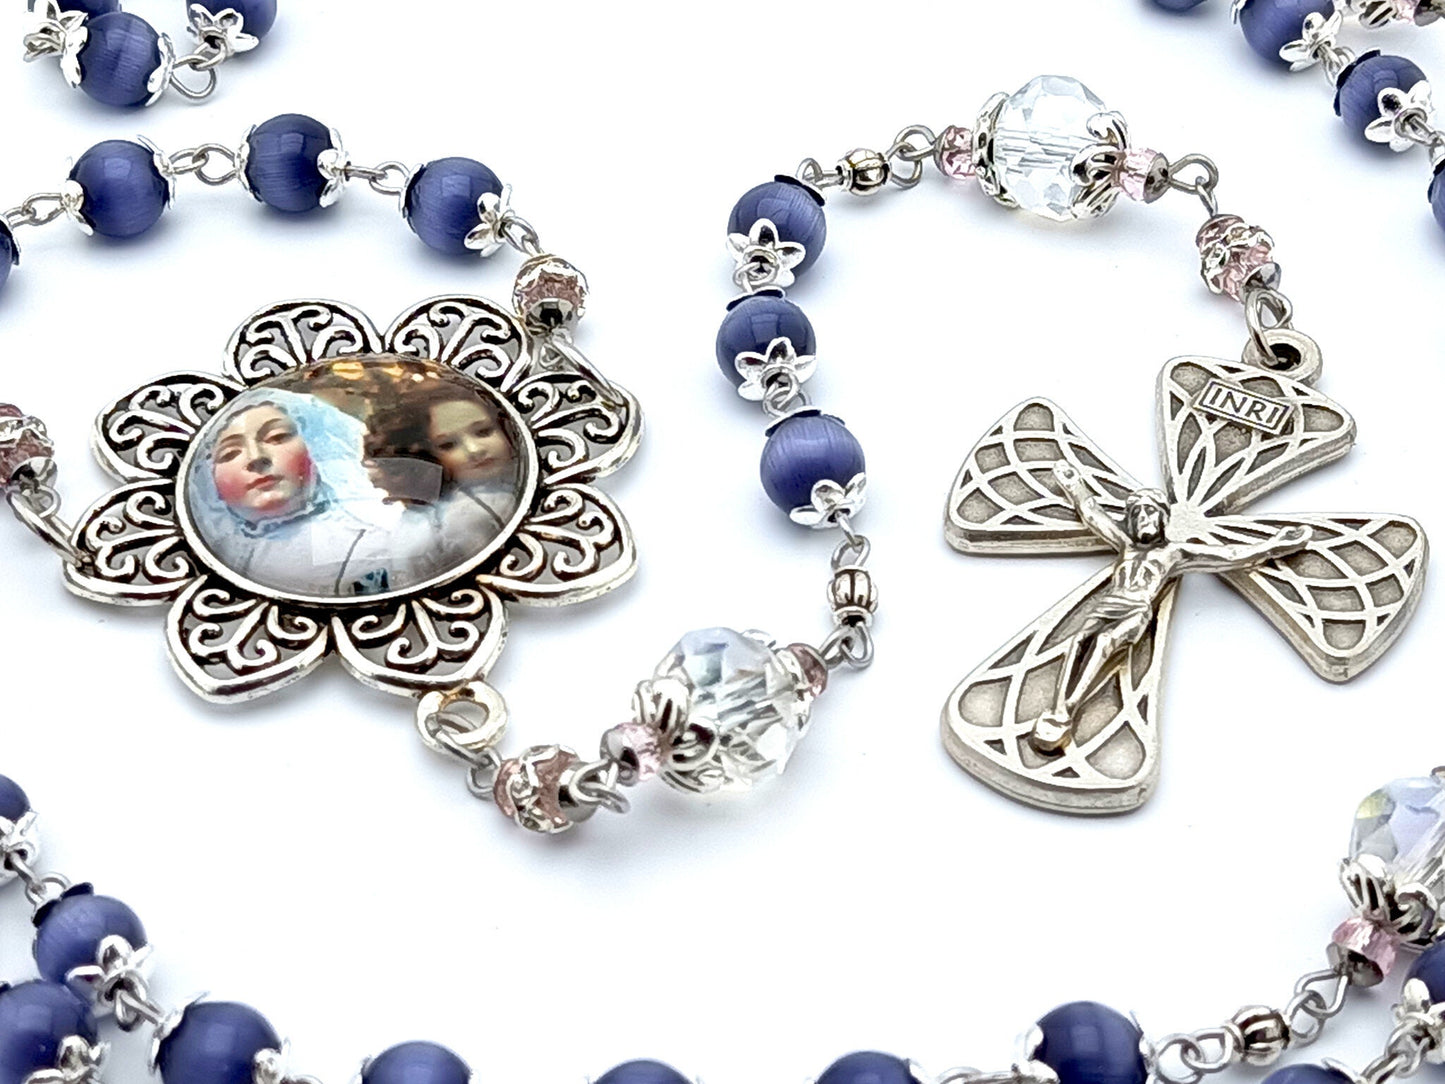 Our Lady of Good Success unique rosary beads with purple tigers eye and clear glass beads, silver harlequin crucifix and picture centre medal.